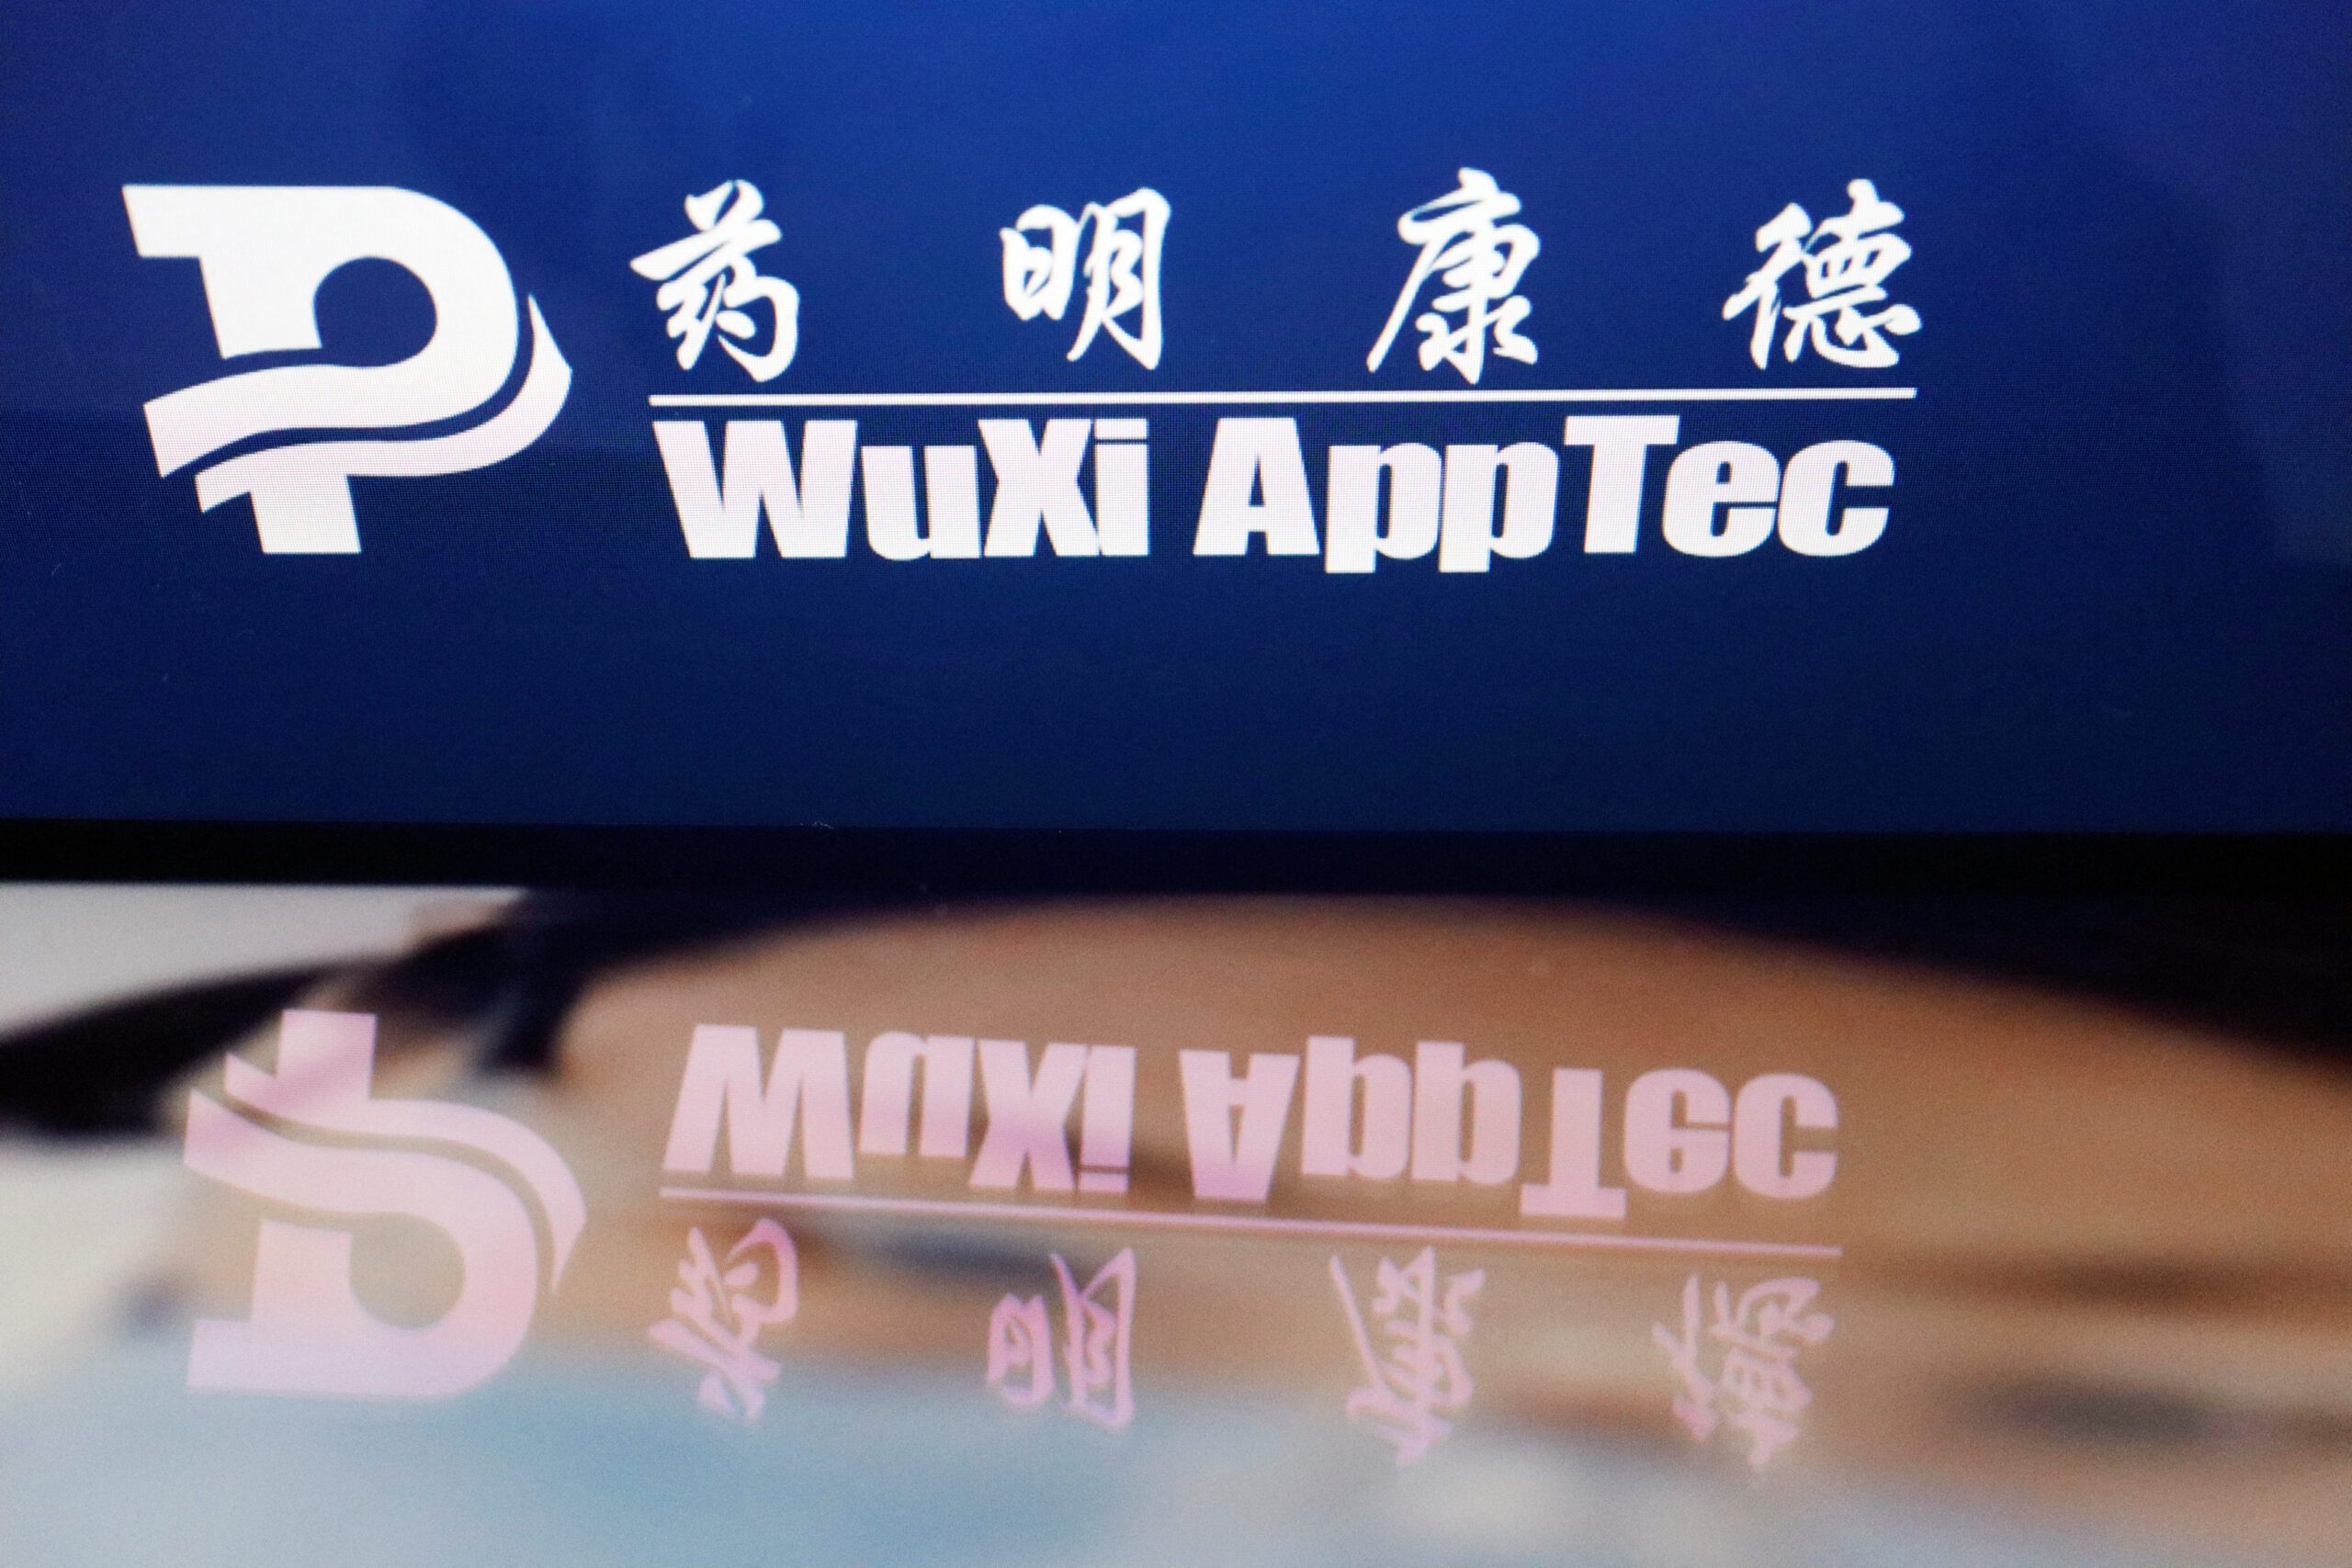 US lawmakers call for sanctions on China's WuXi AppTec biotech firm